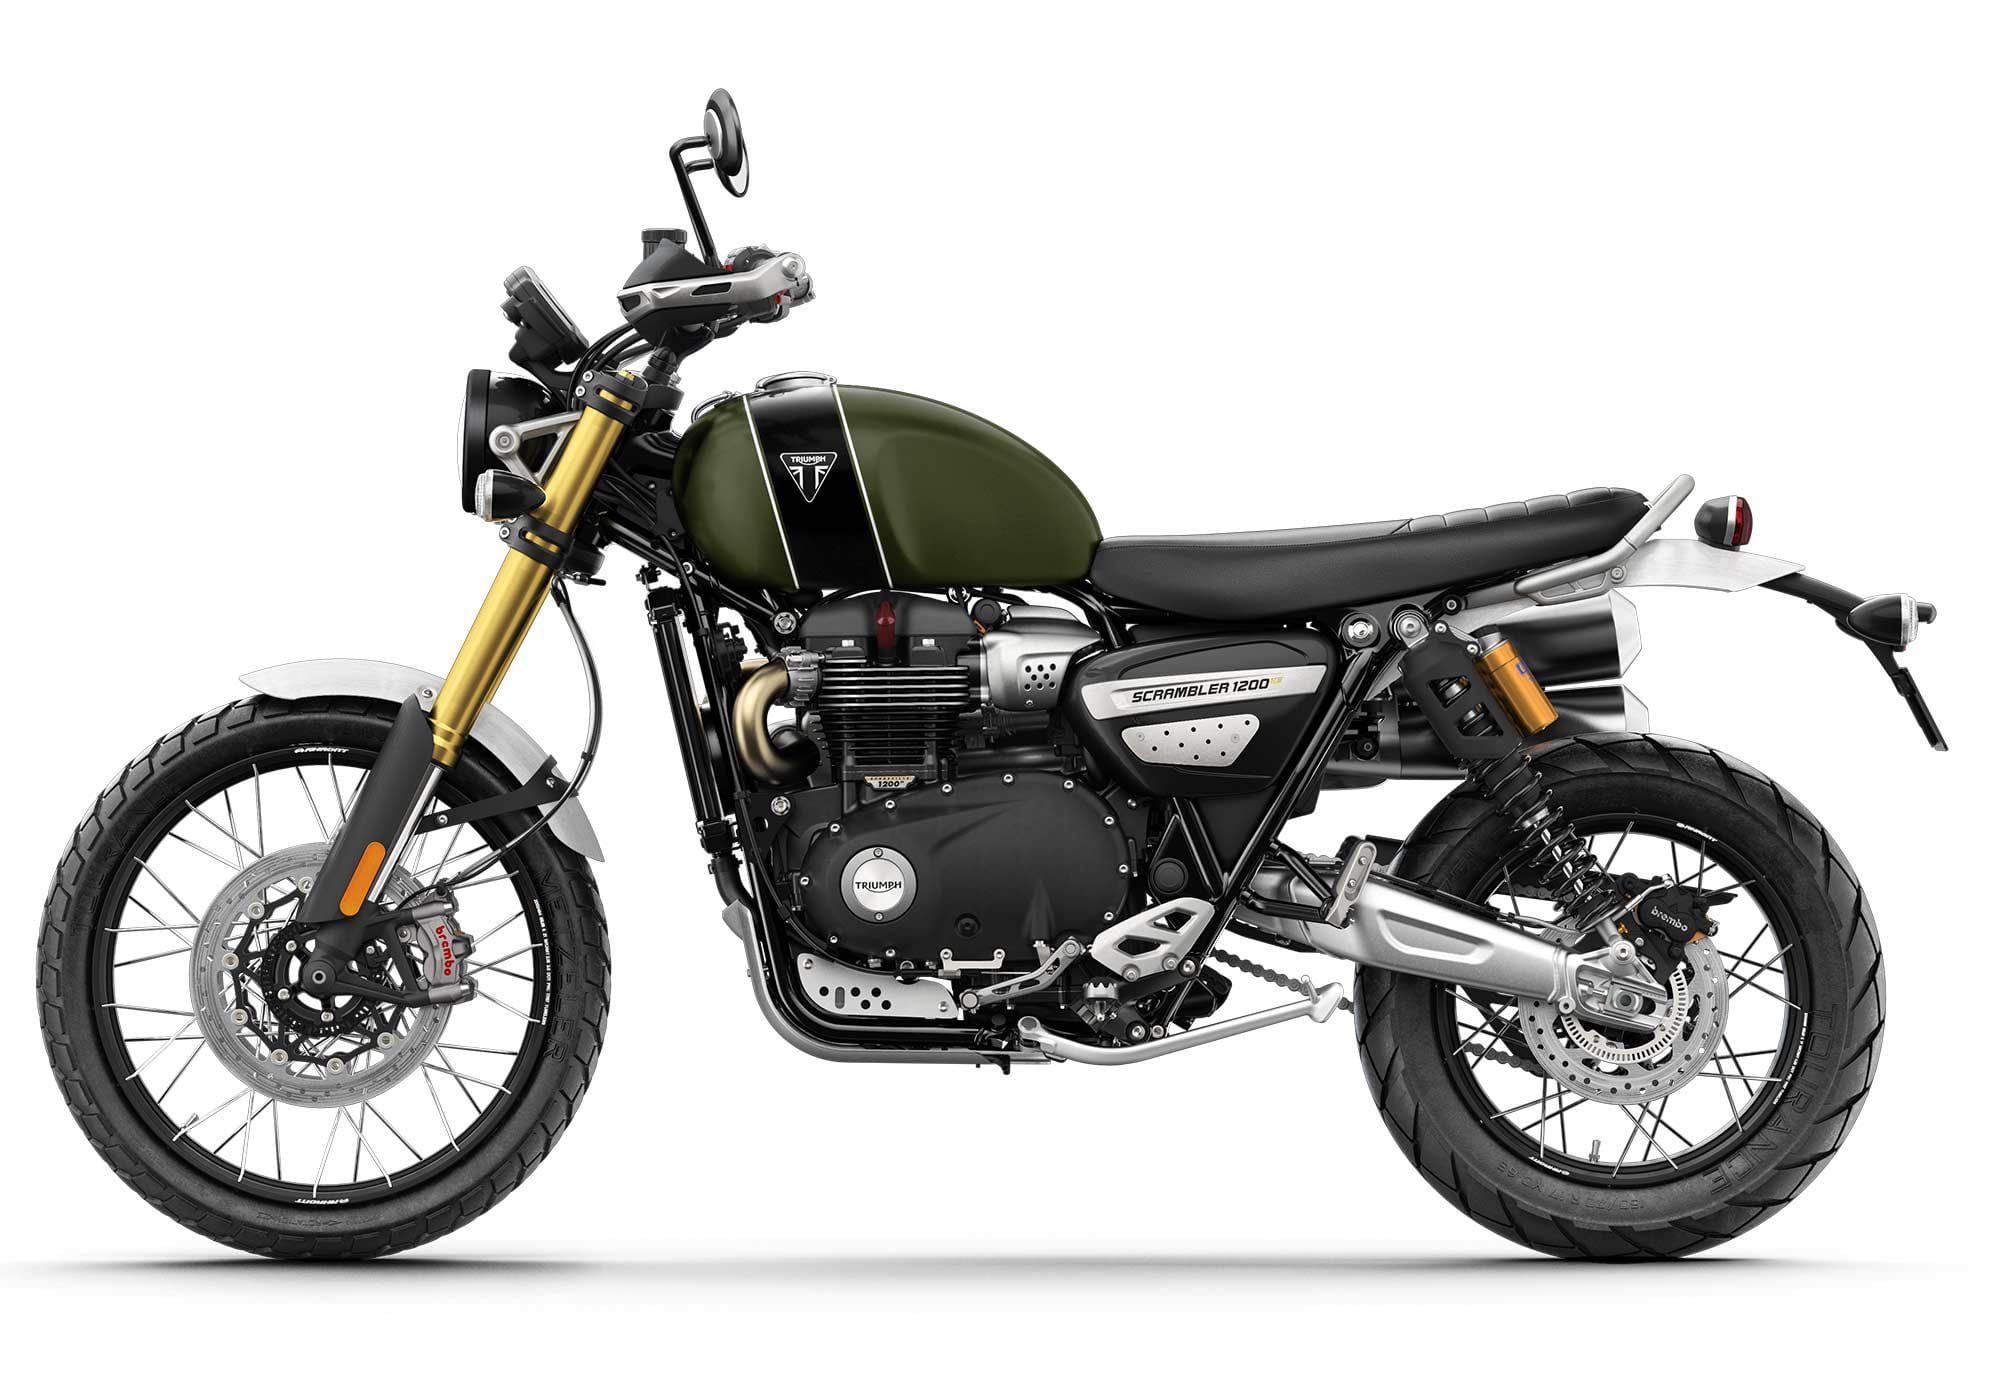 The Triumph Scrambler 1200 XE is slim and roomy for a great amount of legroom.